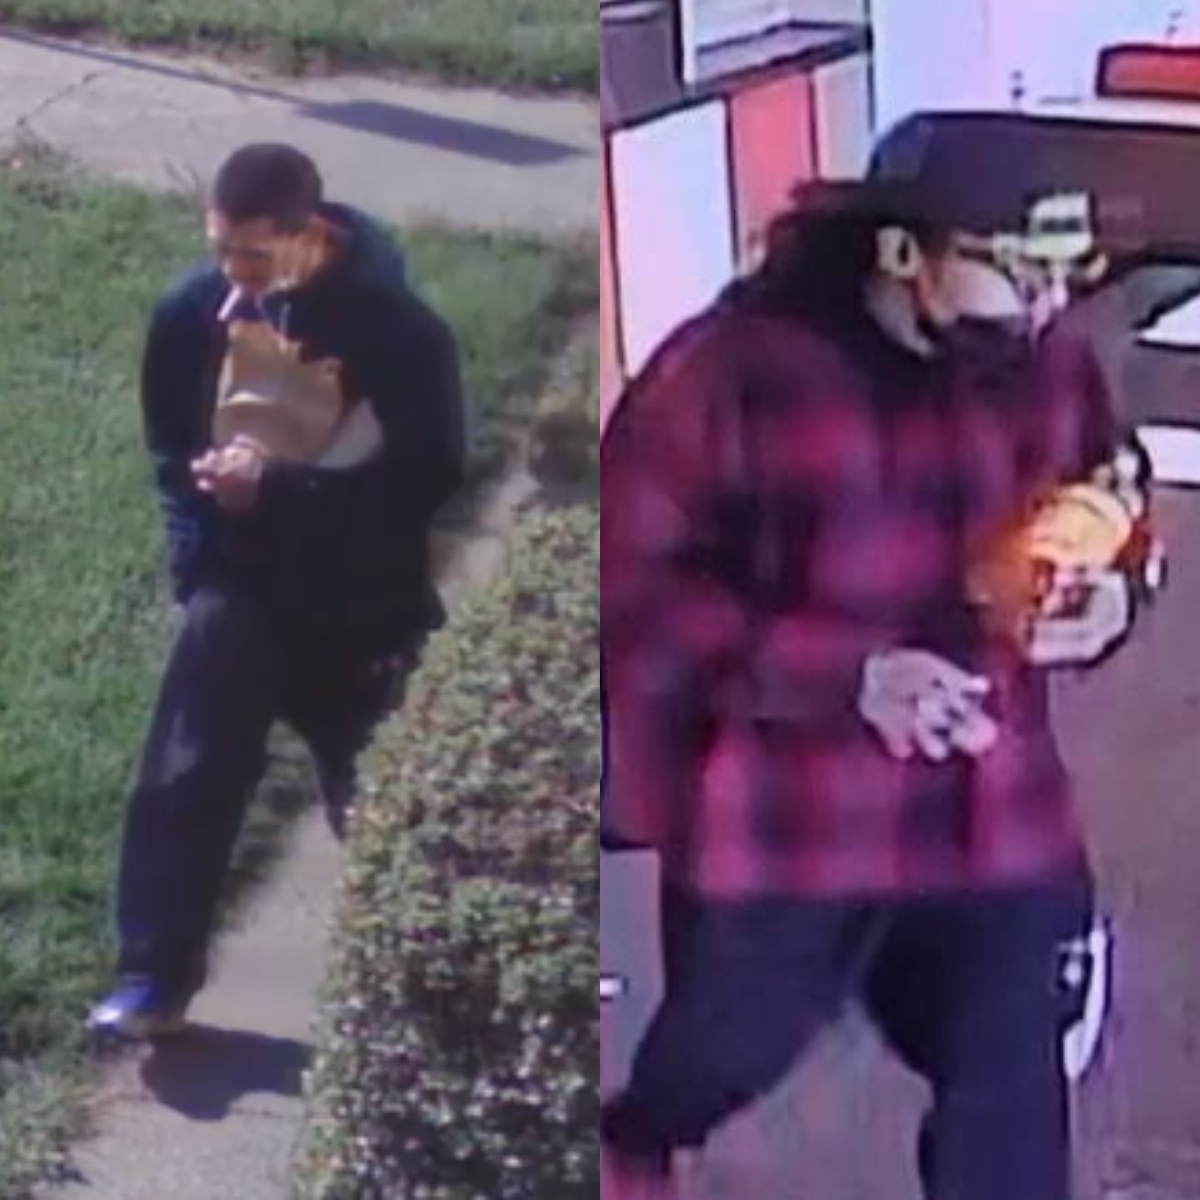 Police are looking to identify these two men.